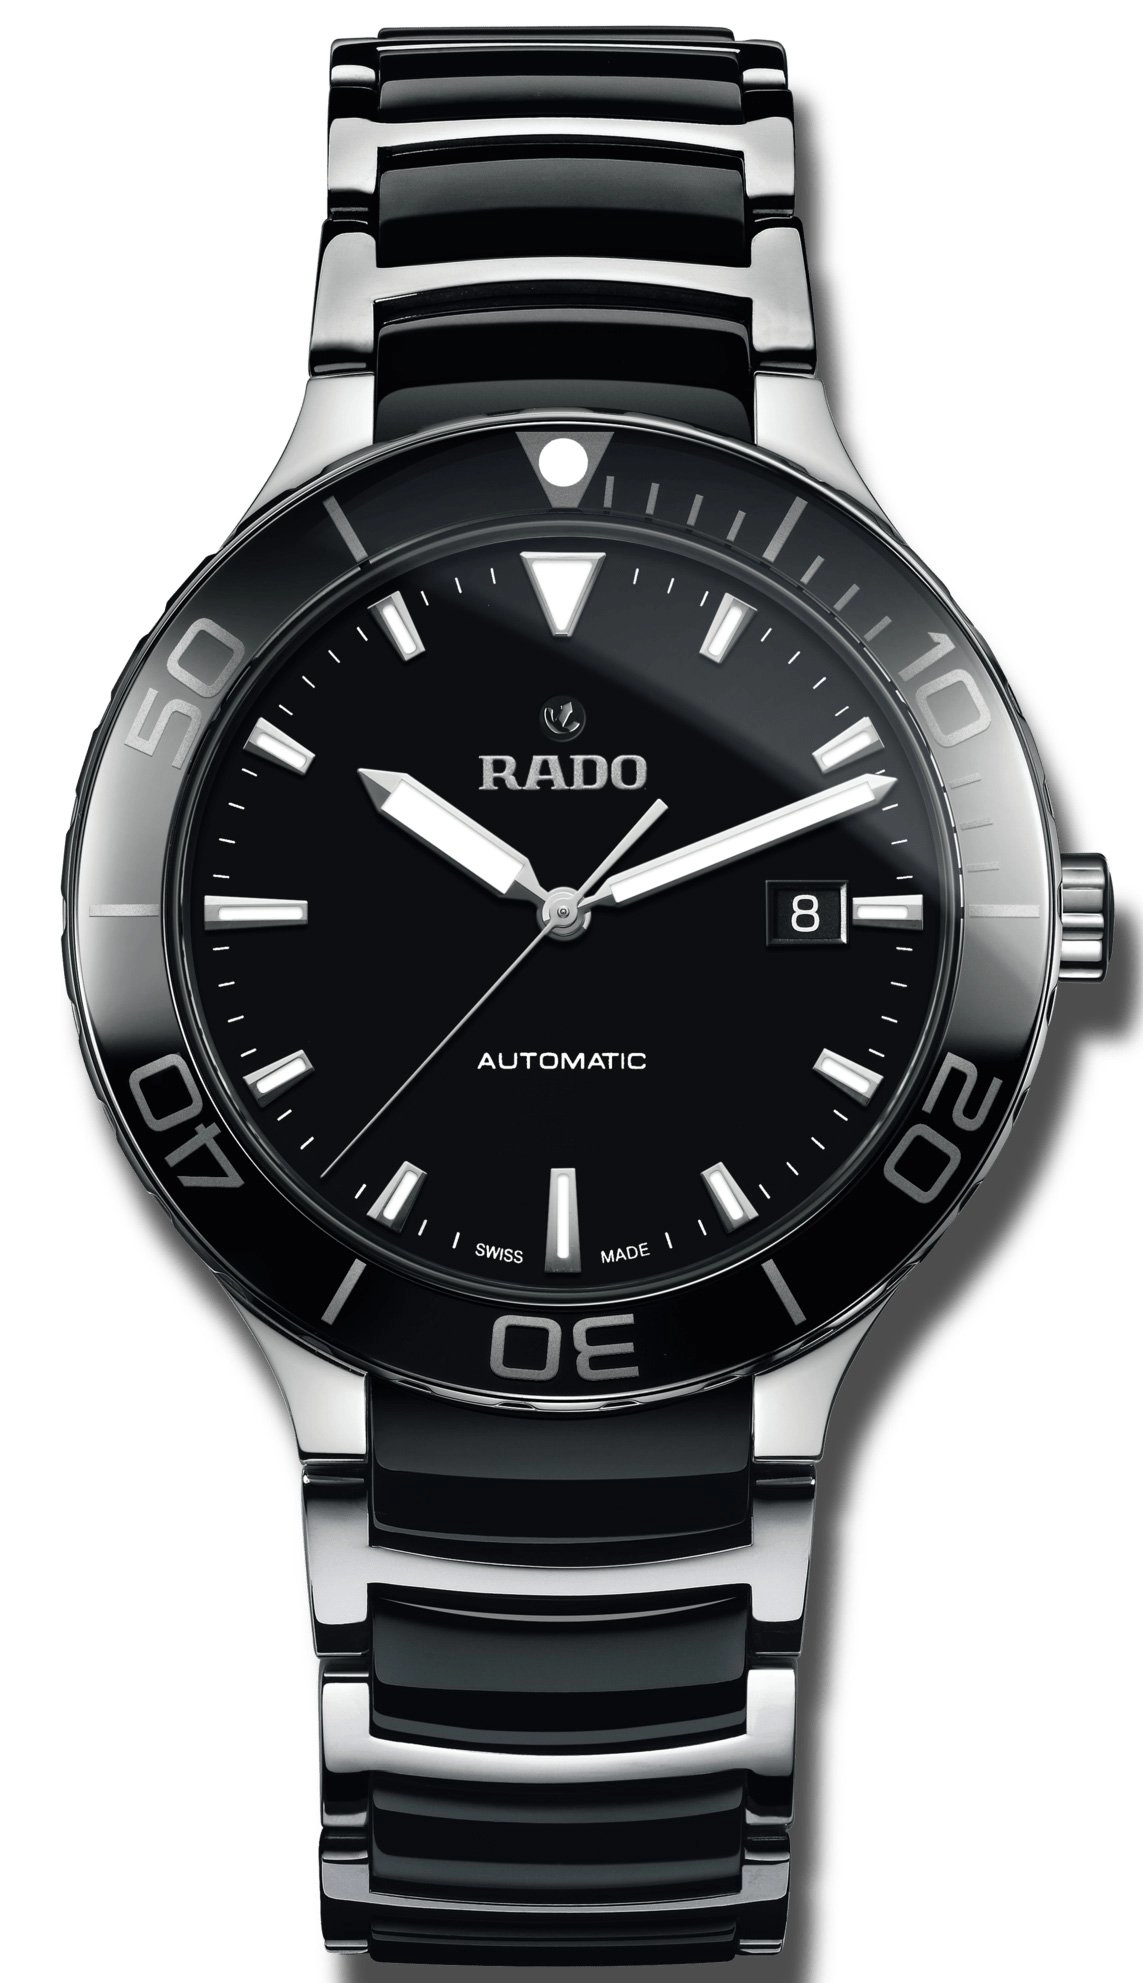 Rado Centrix Automatic Mens watch - Water-resistant 10 bar (100 m), Stainless steel, black